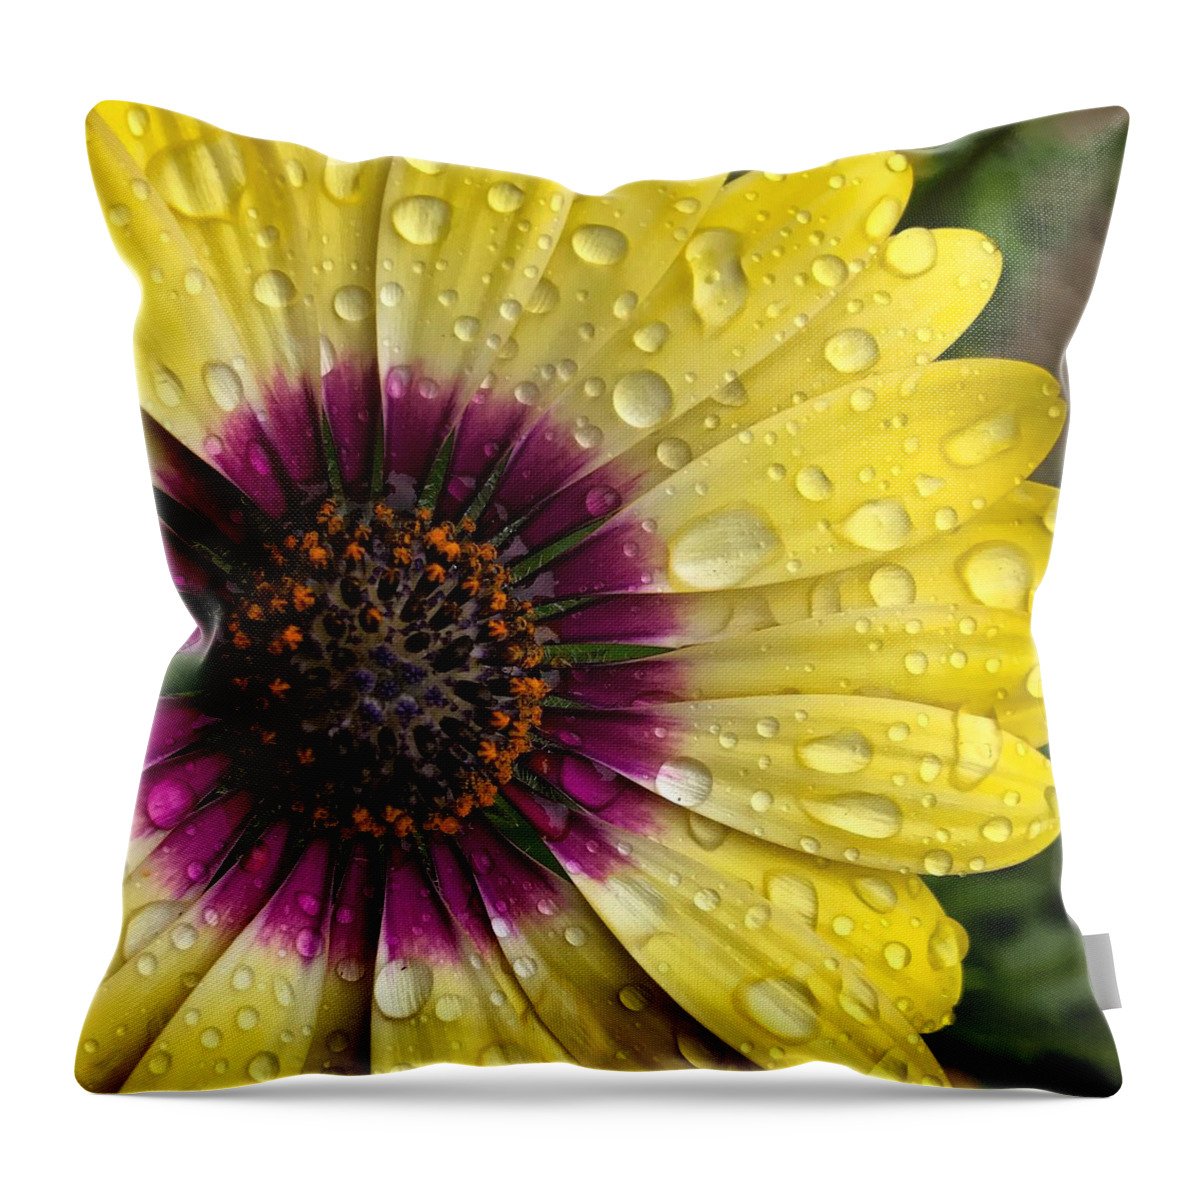 Drops Throw Pillow featuring the photograph Daisy Up Close by Brian Eberly